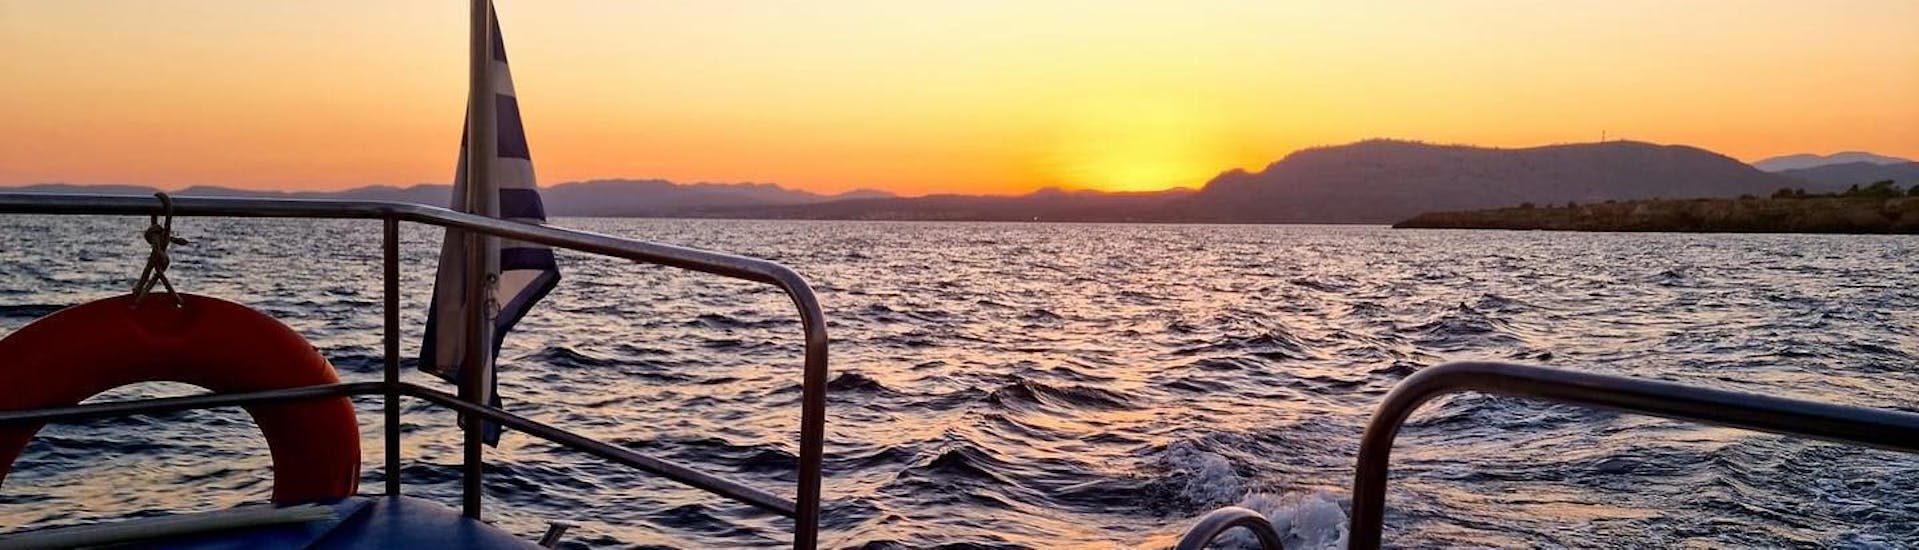 The boat is navigating under the sunset during the Private Sunset Glass-Bottom Boat Trip to Pefkos with Swimming at Navarone Bay.